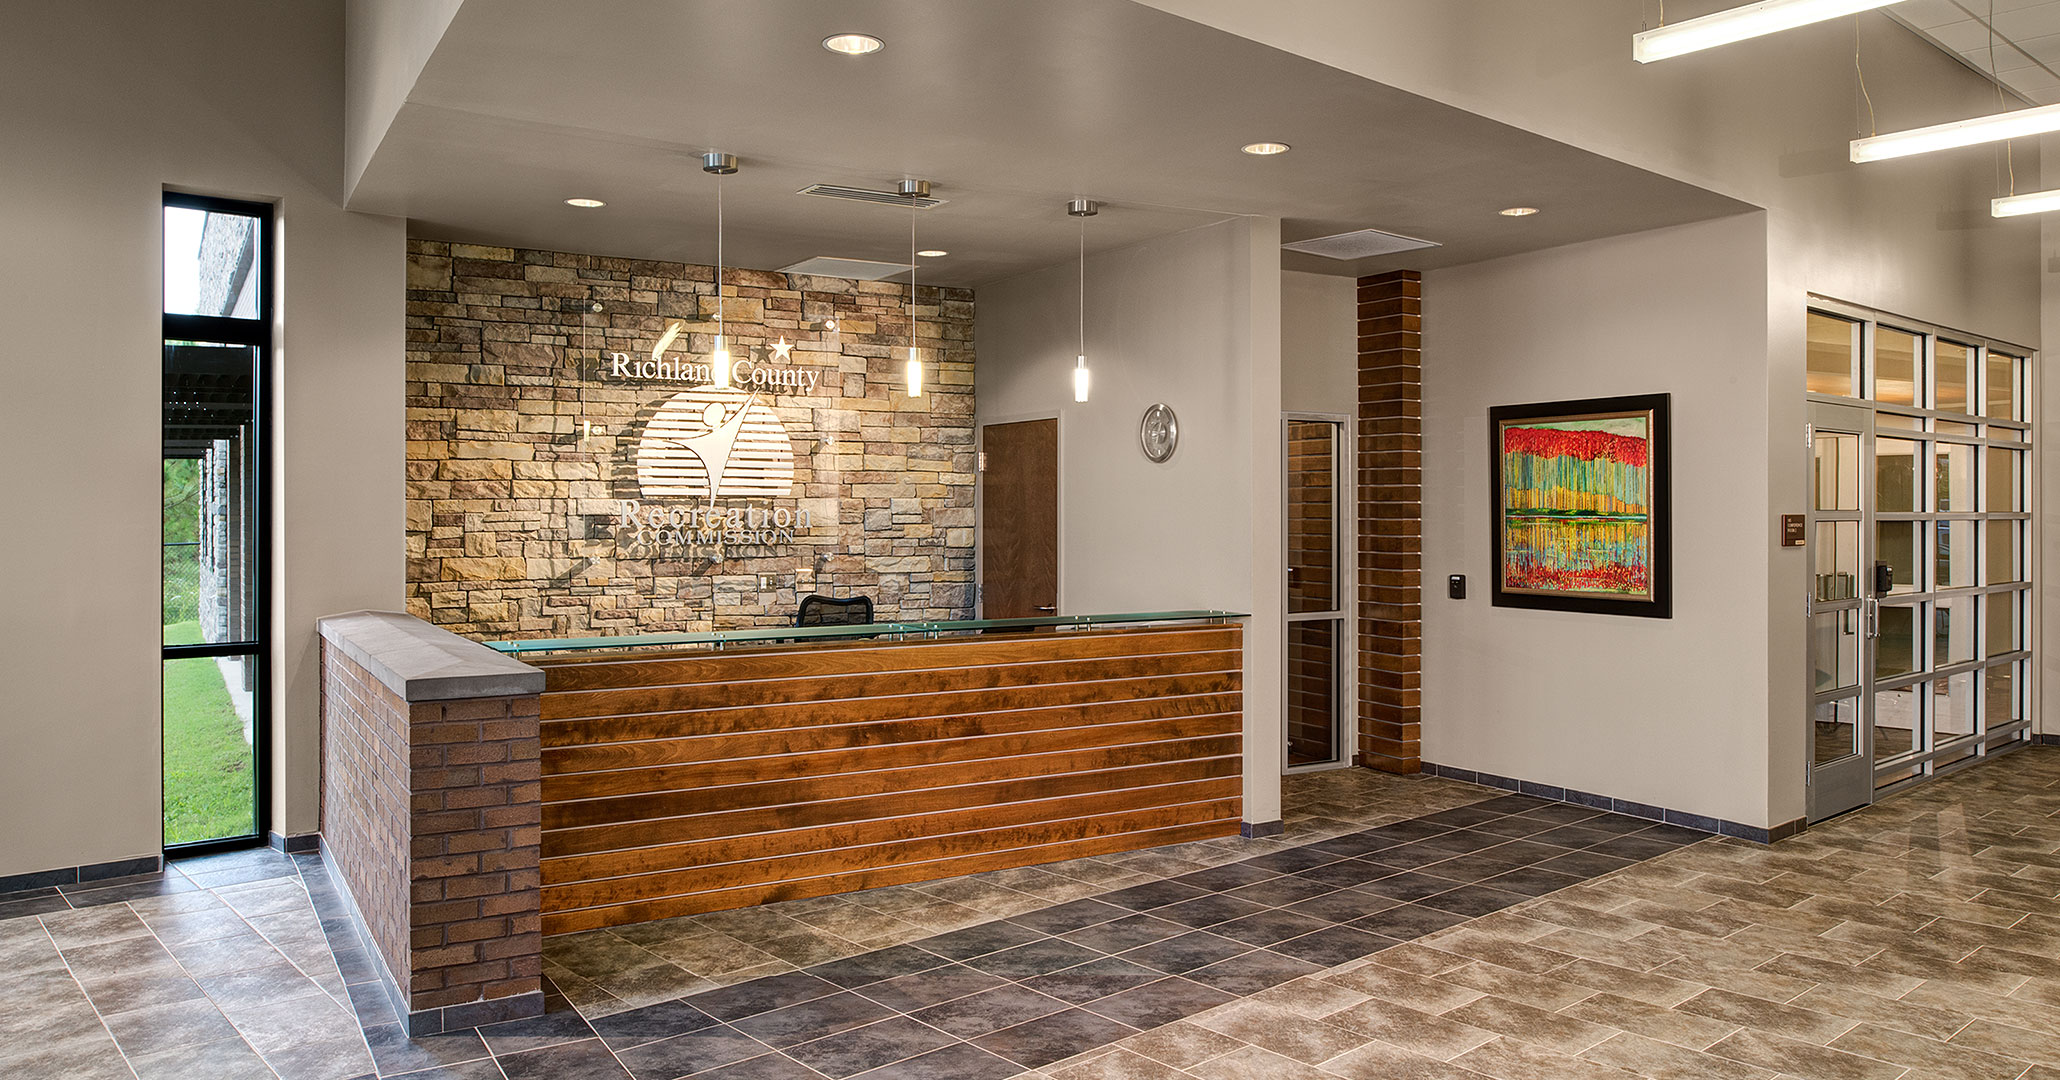 Boudreaux architects worked with the Richland County Recreation Commission to design the interiors at the RCRC Headquarters.